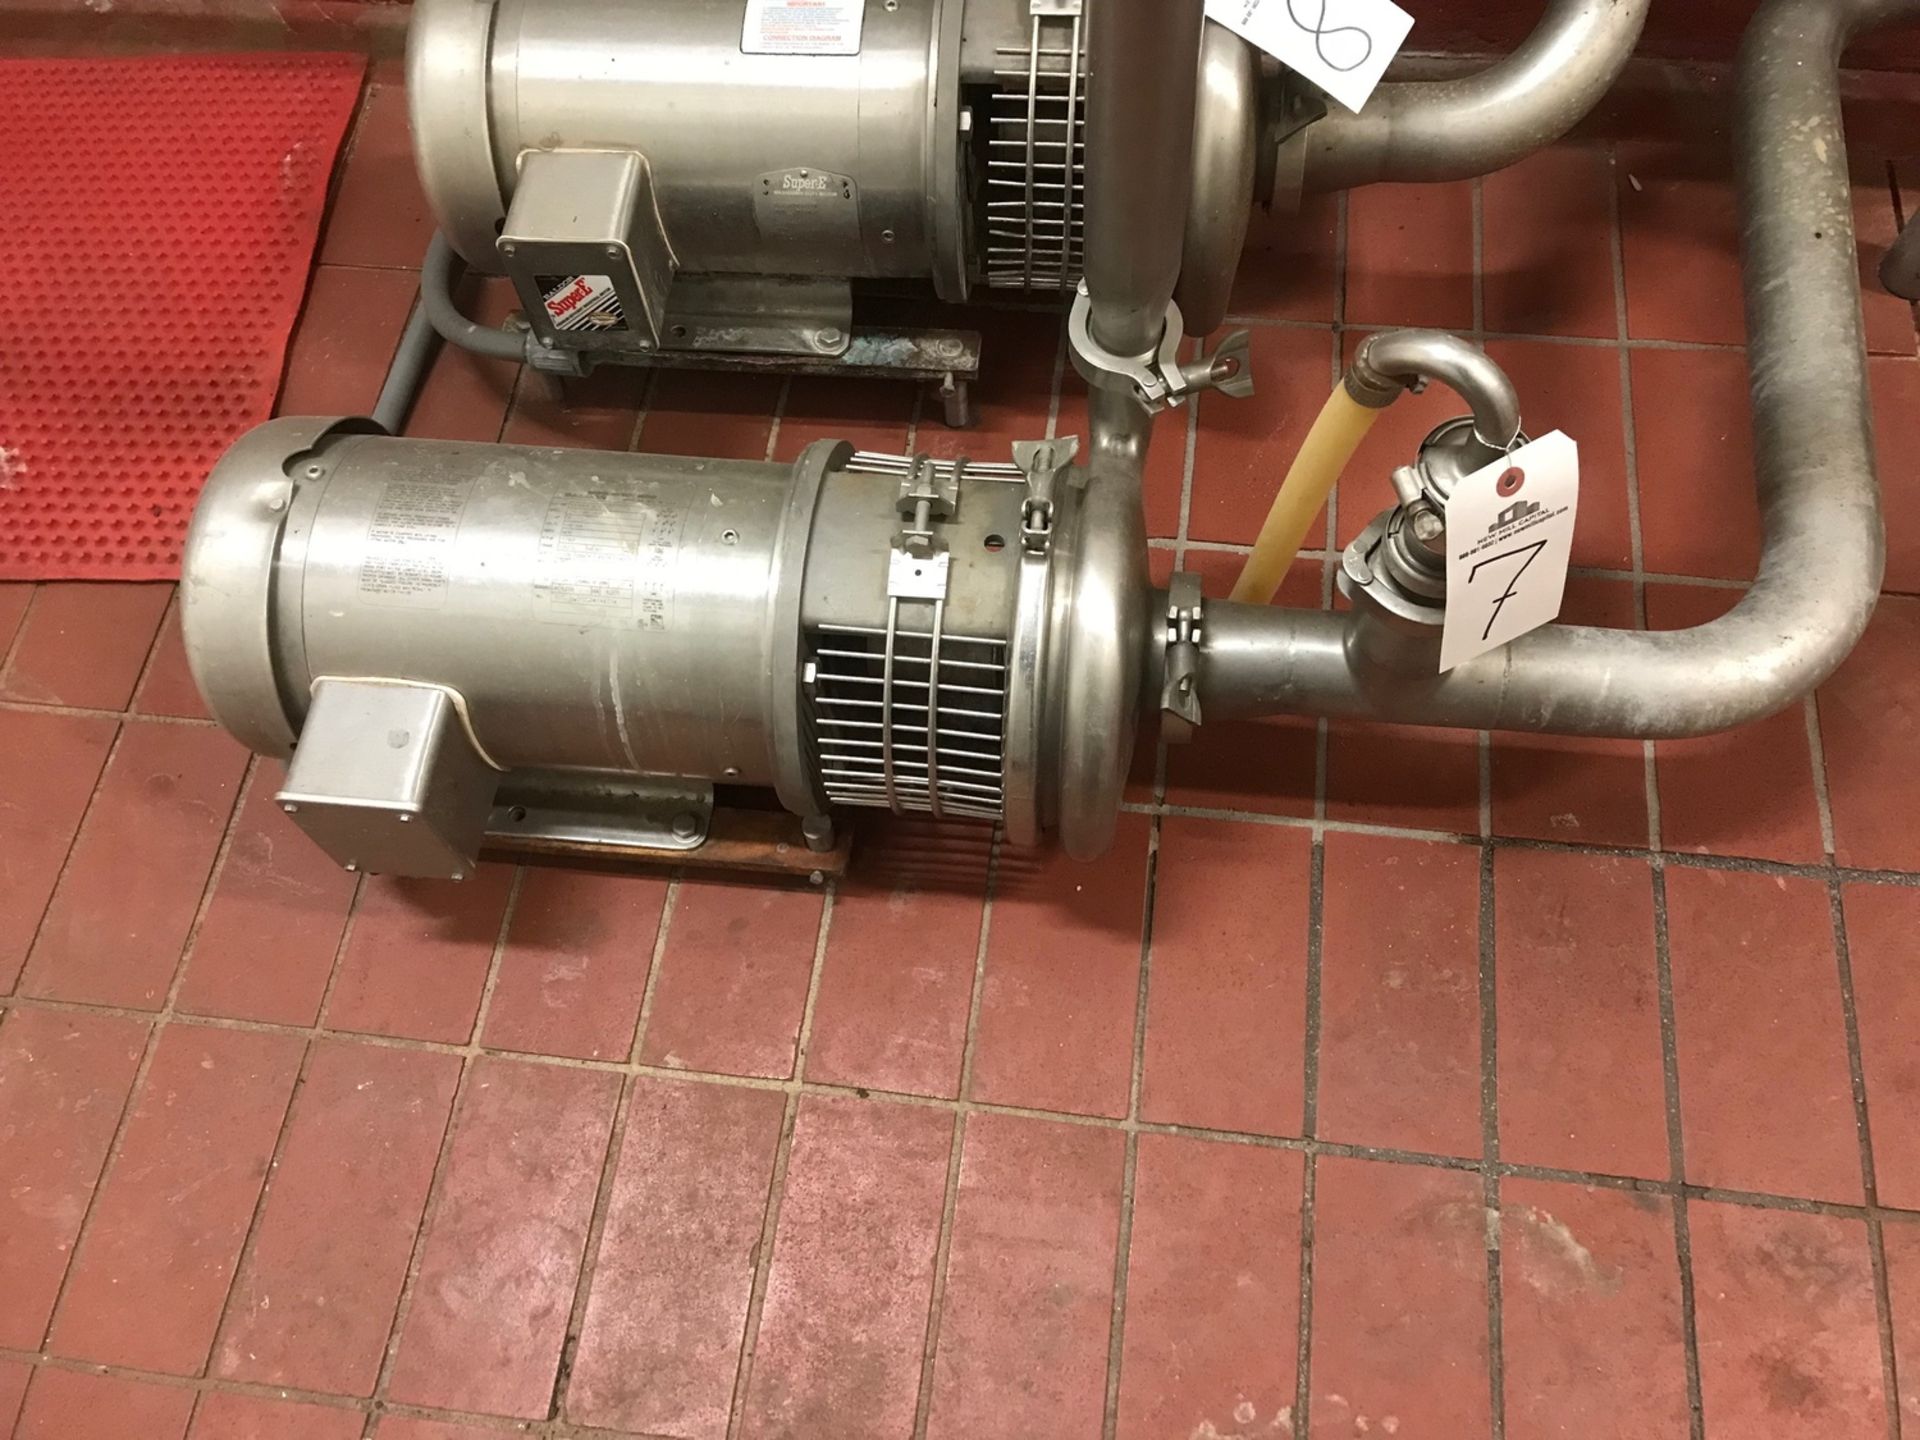 Stainless Steel Centrifugal Pump with Stainless Steel Motor, 3 HP, 3" inlet, 1.5" outlet - Image 2 of 3